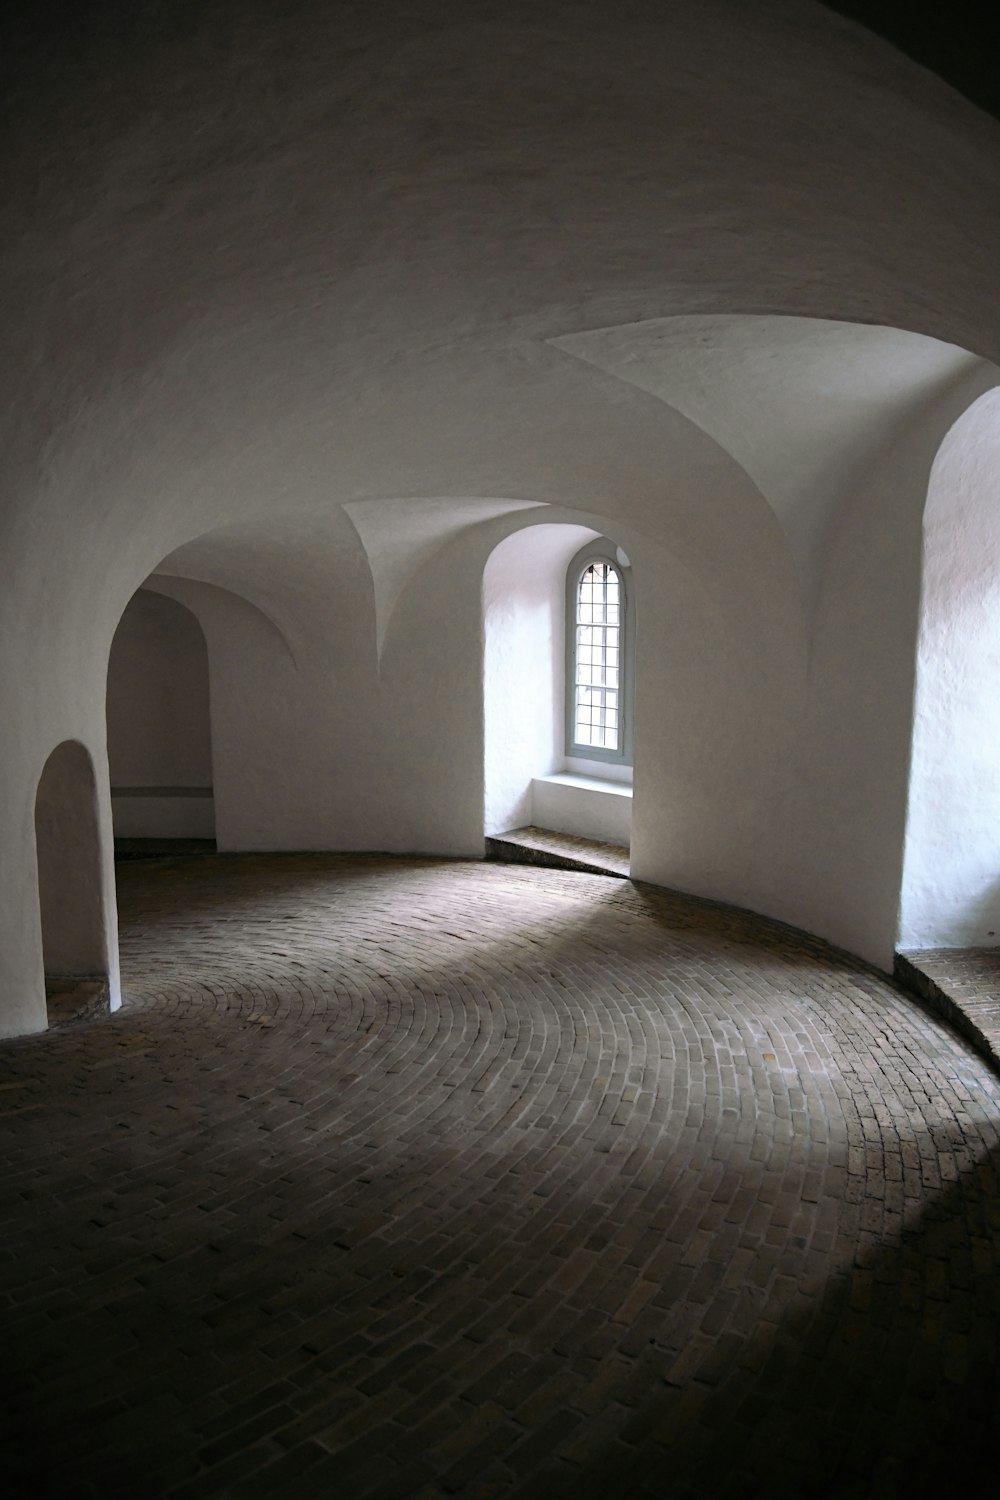 an empty room with a brick floor and arched windows